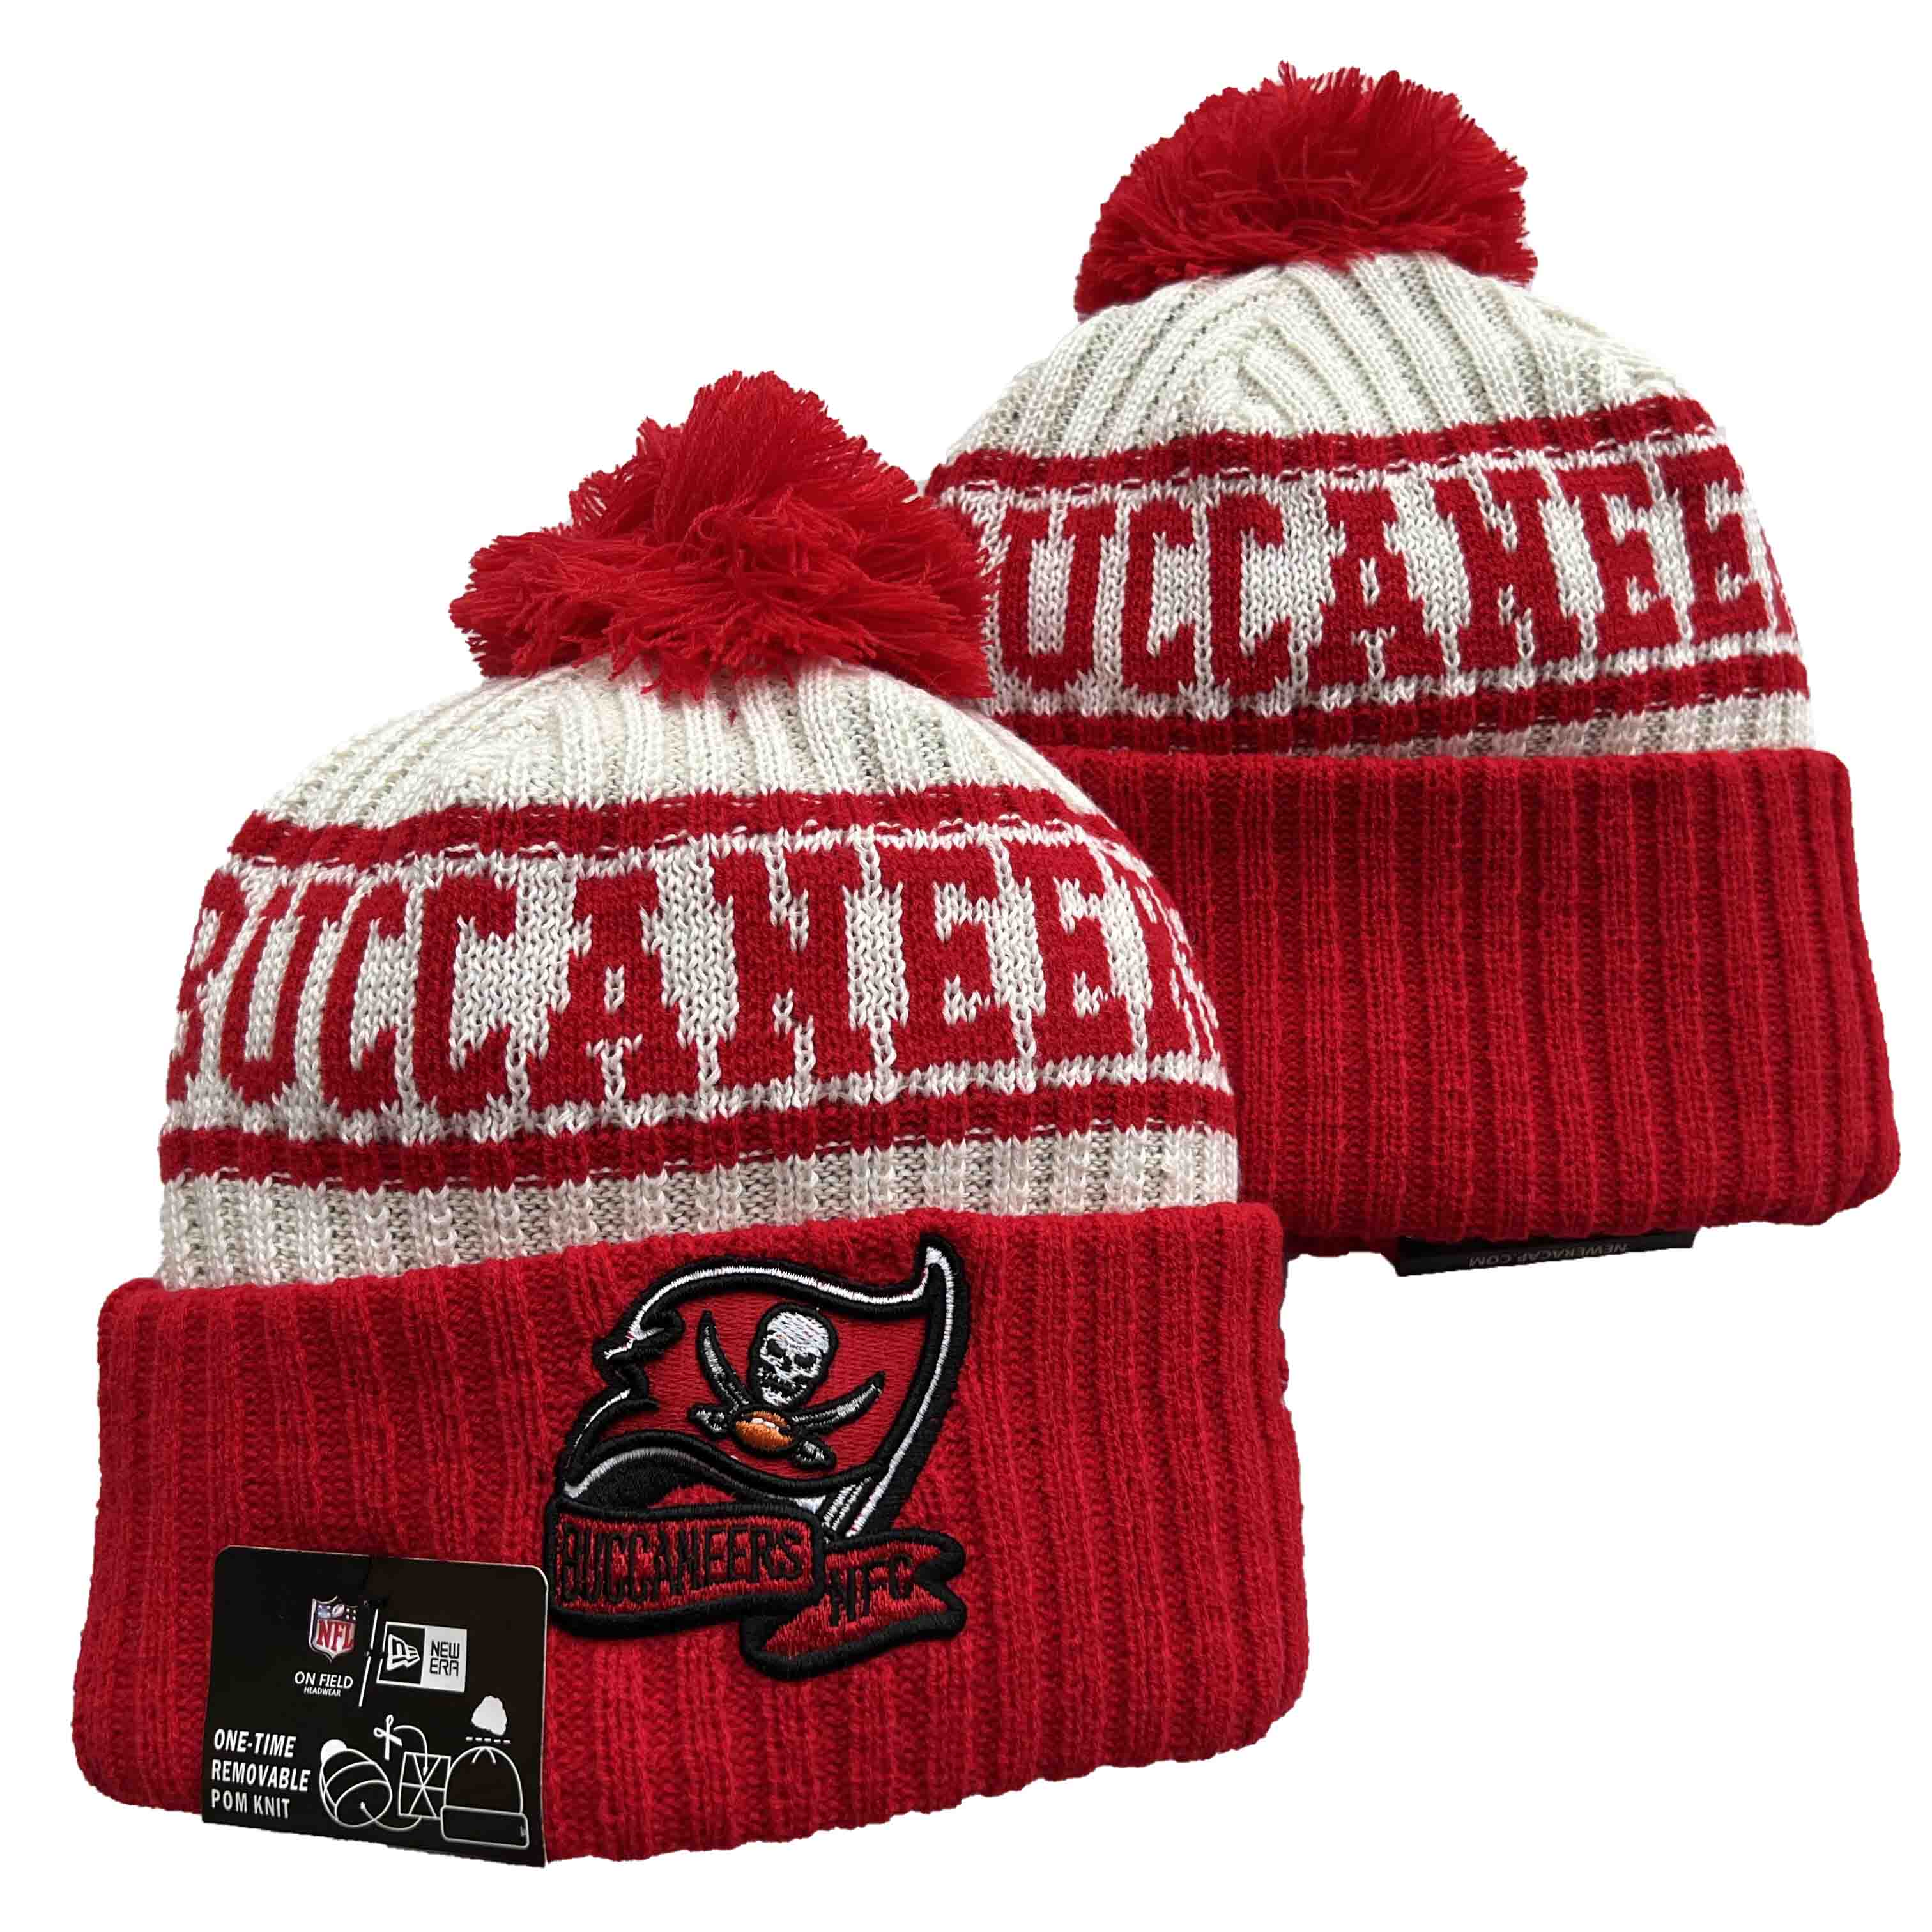 NFL Tampa Bay Buccaneers Beanies Knit Hats-YD1283